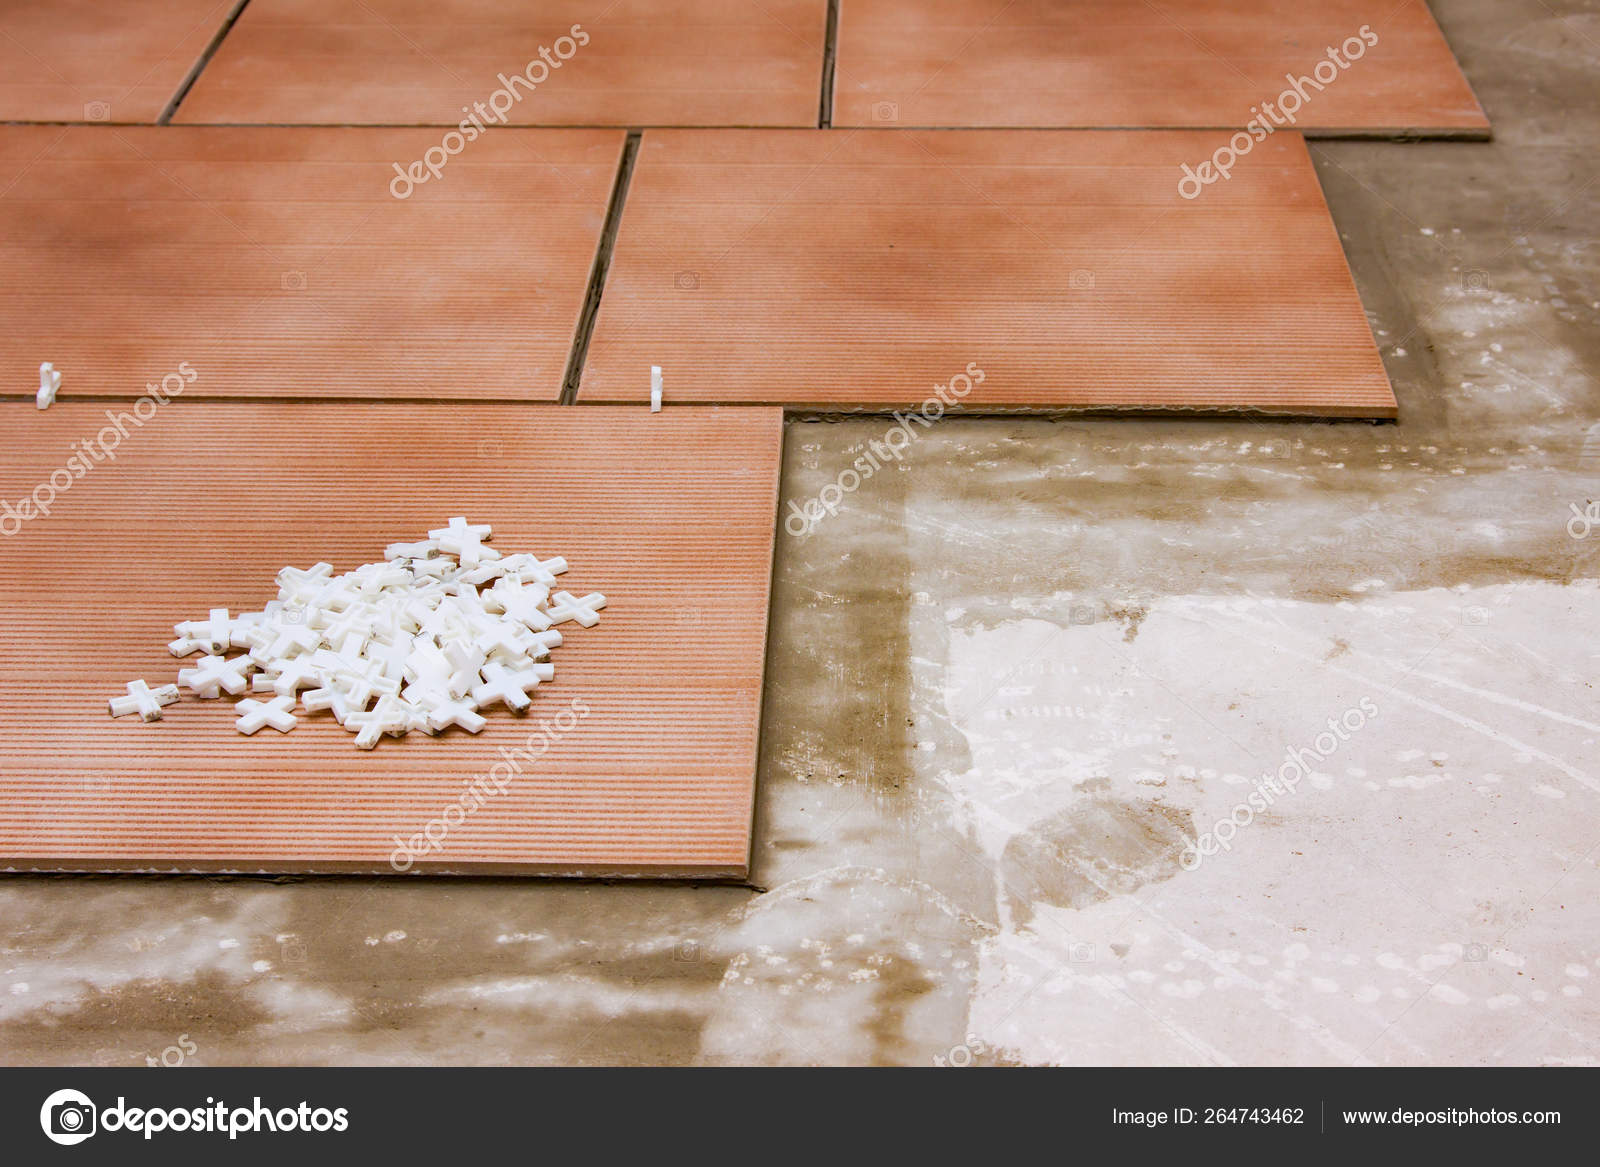 Laying Ceramic Tiles And Tile Spacers, How To Lay Ceramic Floor Tile